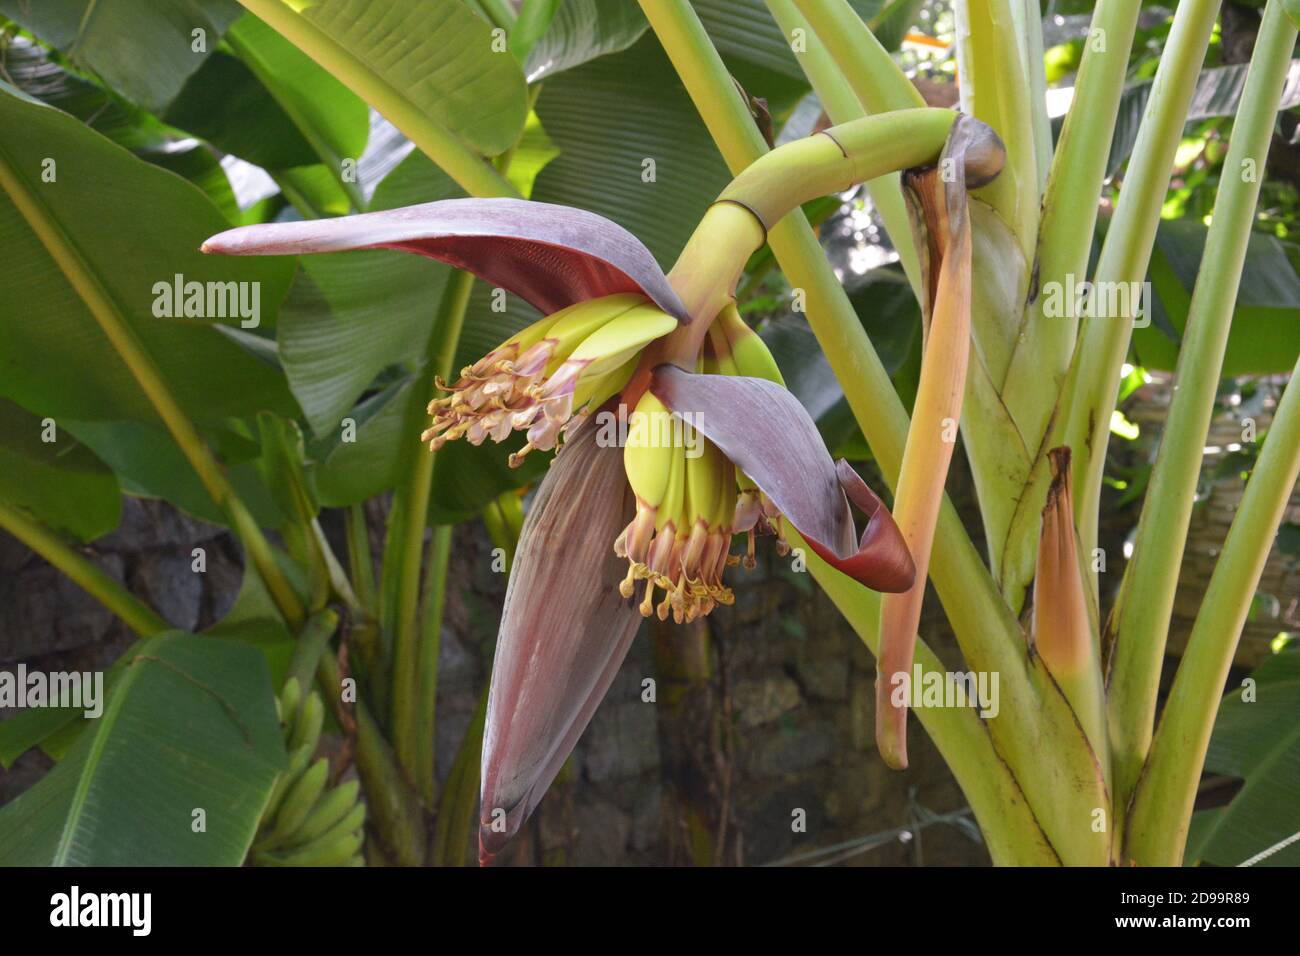 Fresh Fruit Tree with Unripened Bananas Hanging in a Bunch Photograph by  DejaVu Designs - Fine Art America